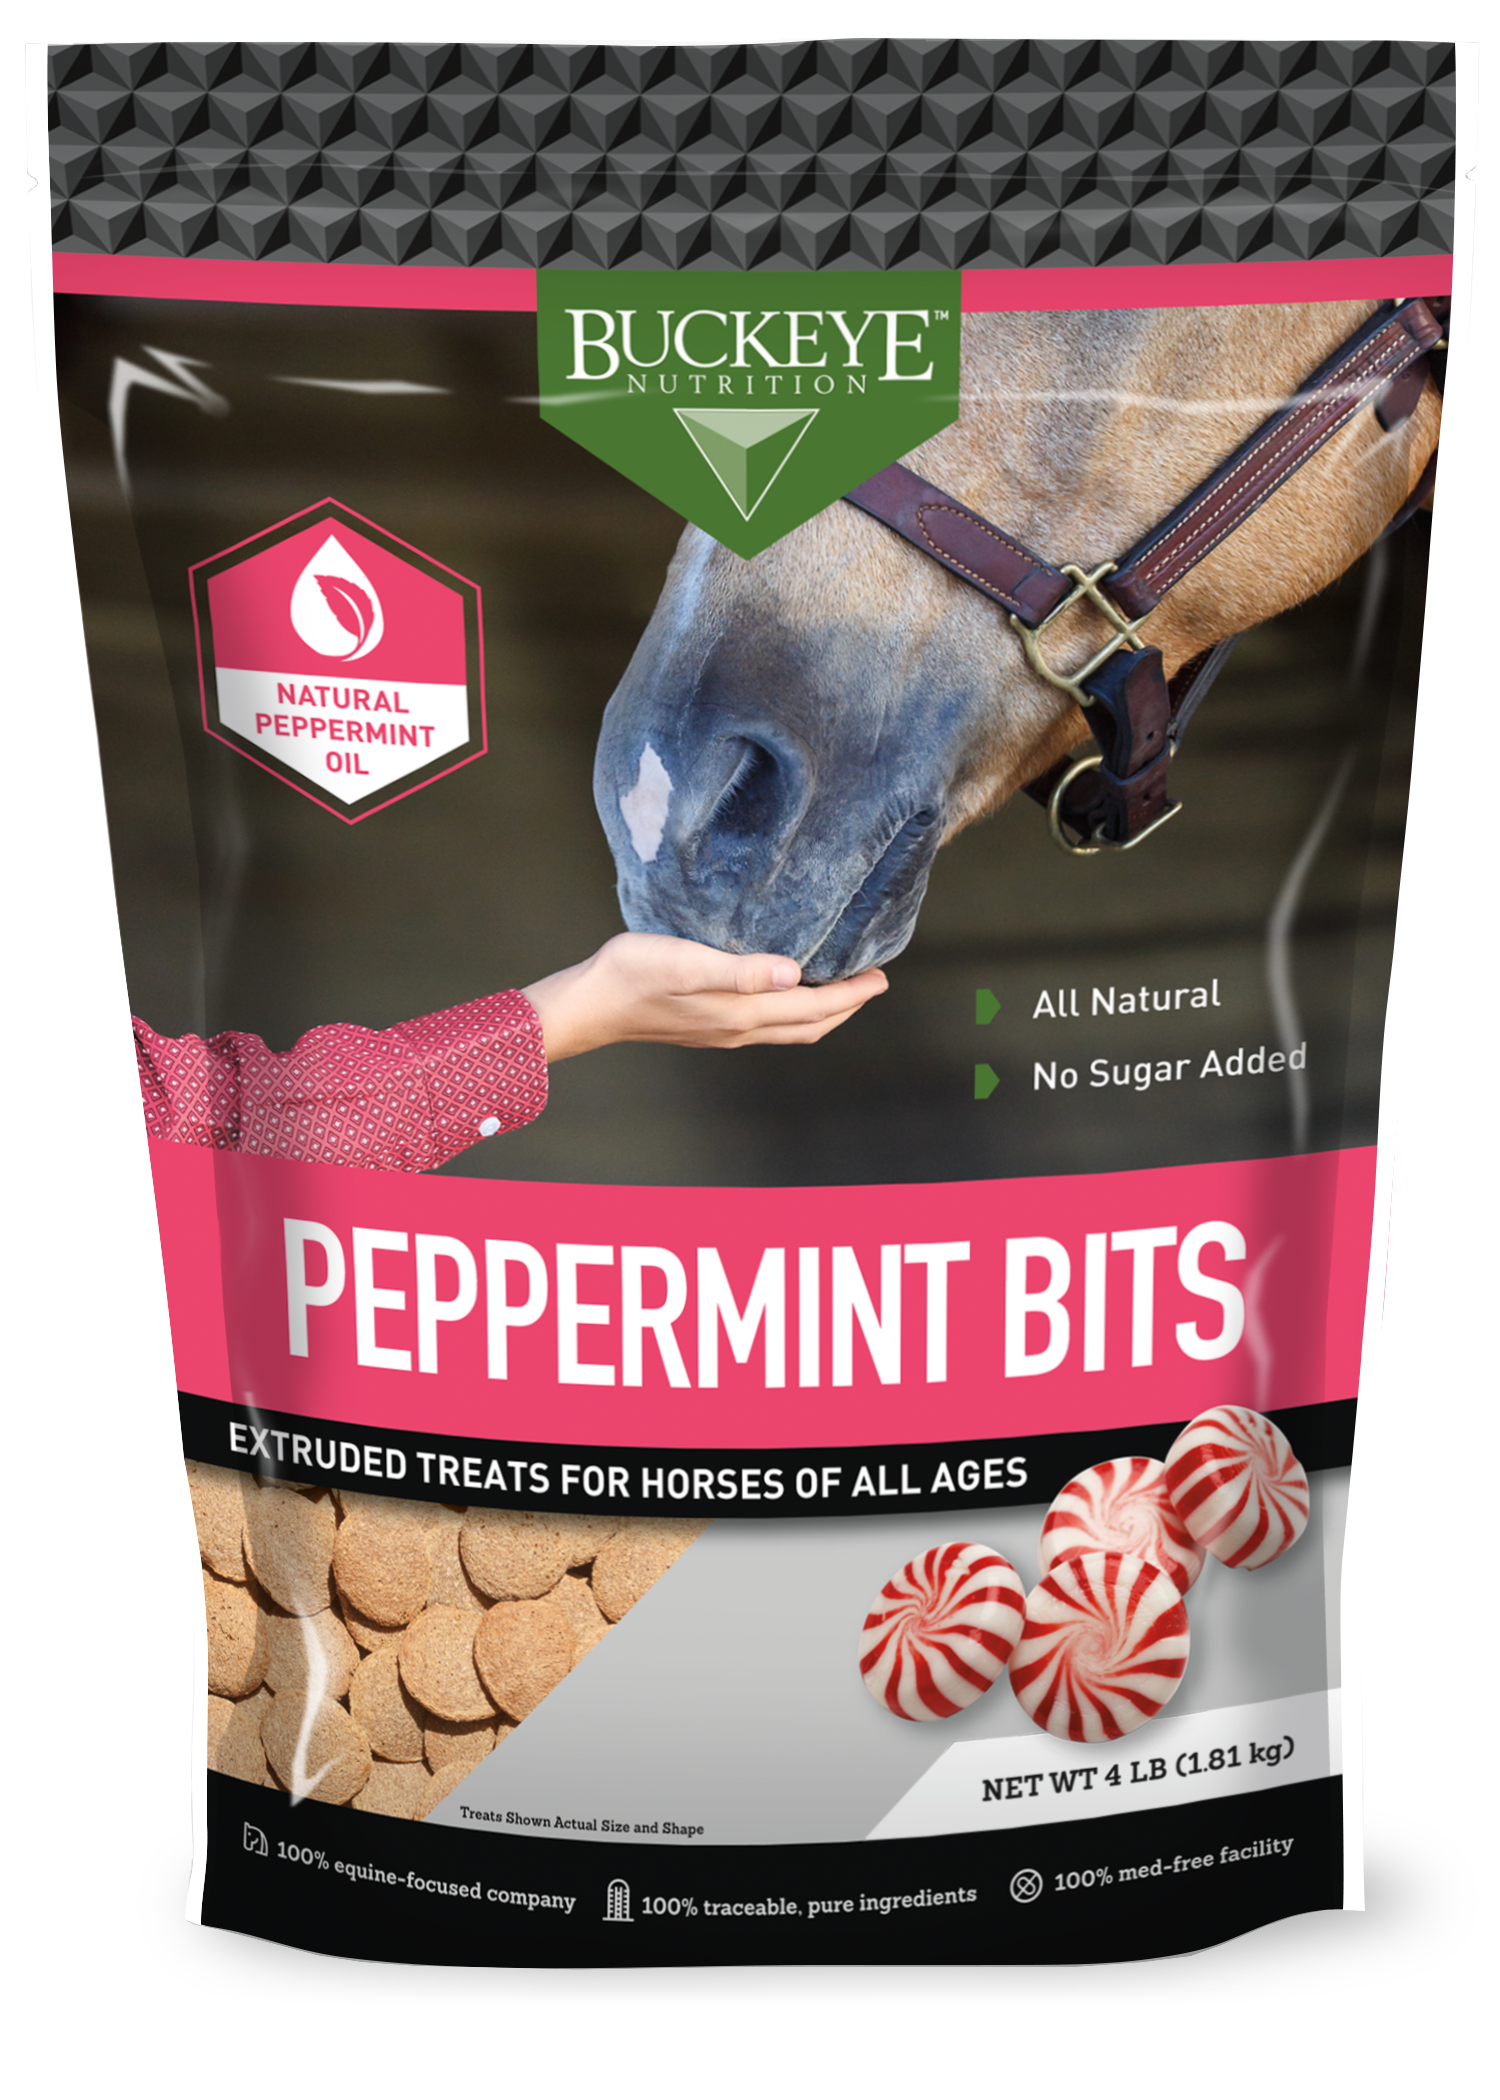 All Natural No Sugar Added Peppermint Bits Treats image 1++